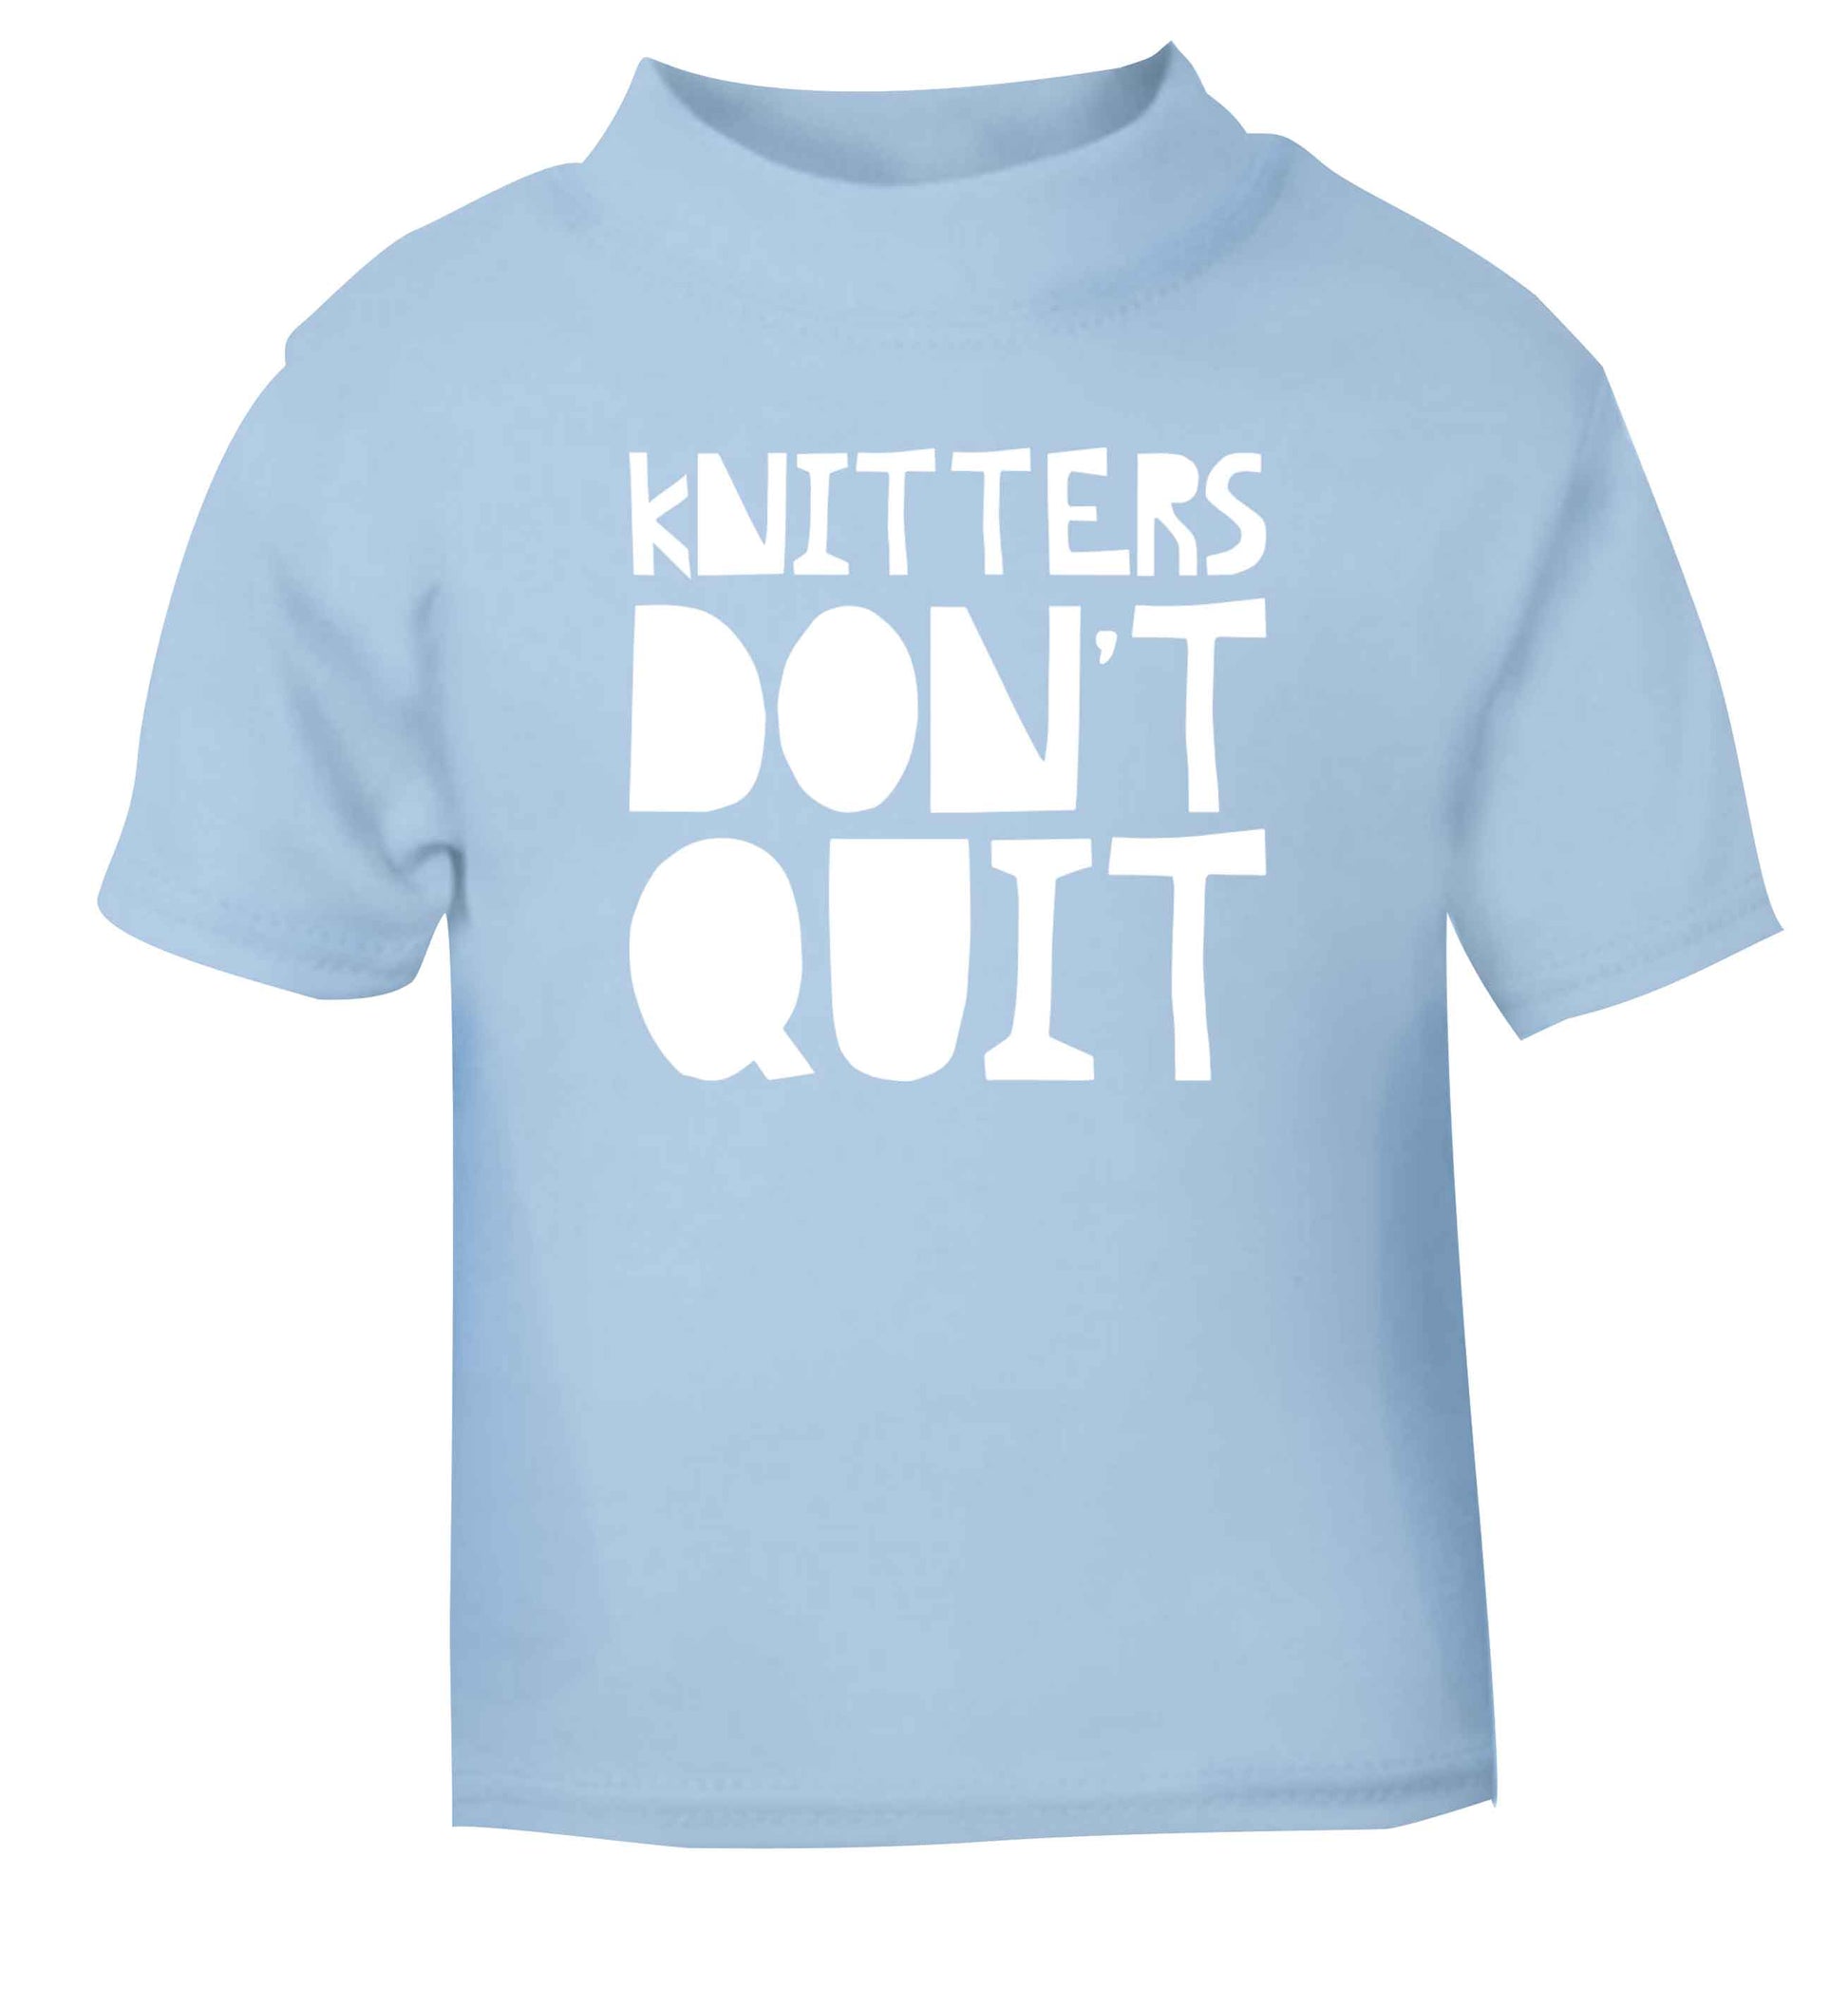 Knitters don't quit light blue Baby Toddler Tshirt 2 Years